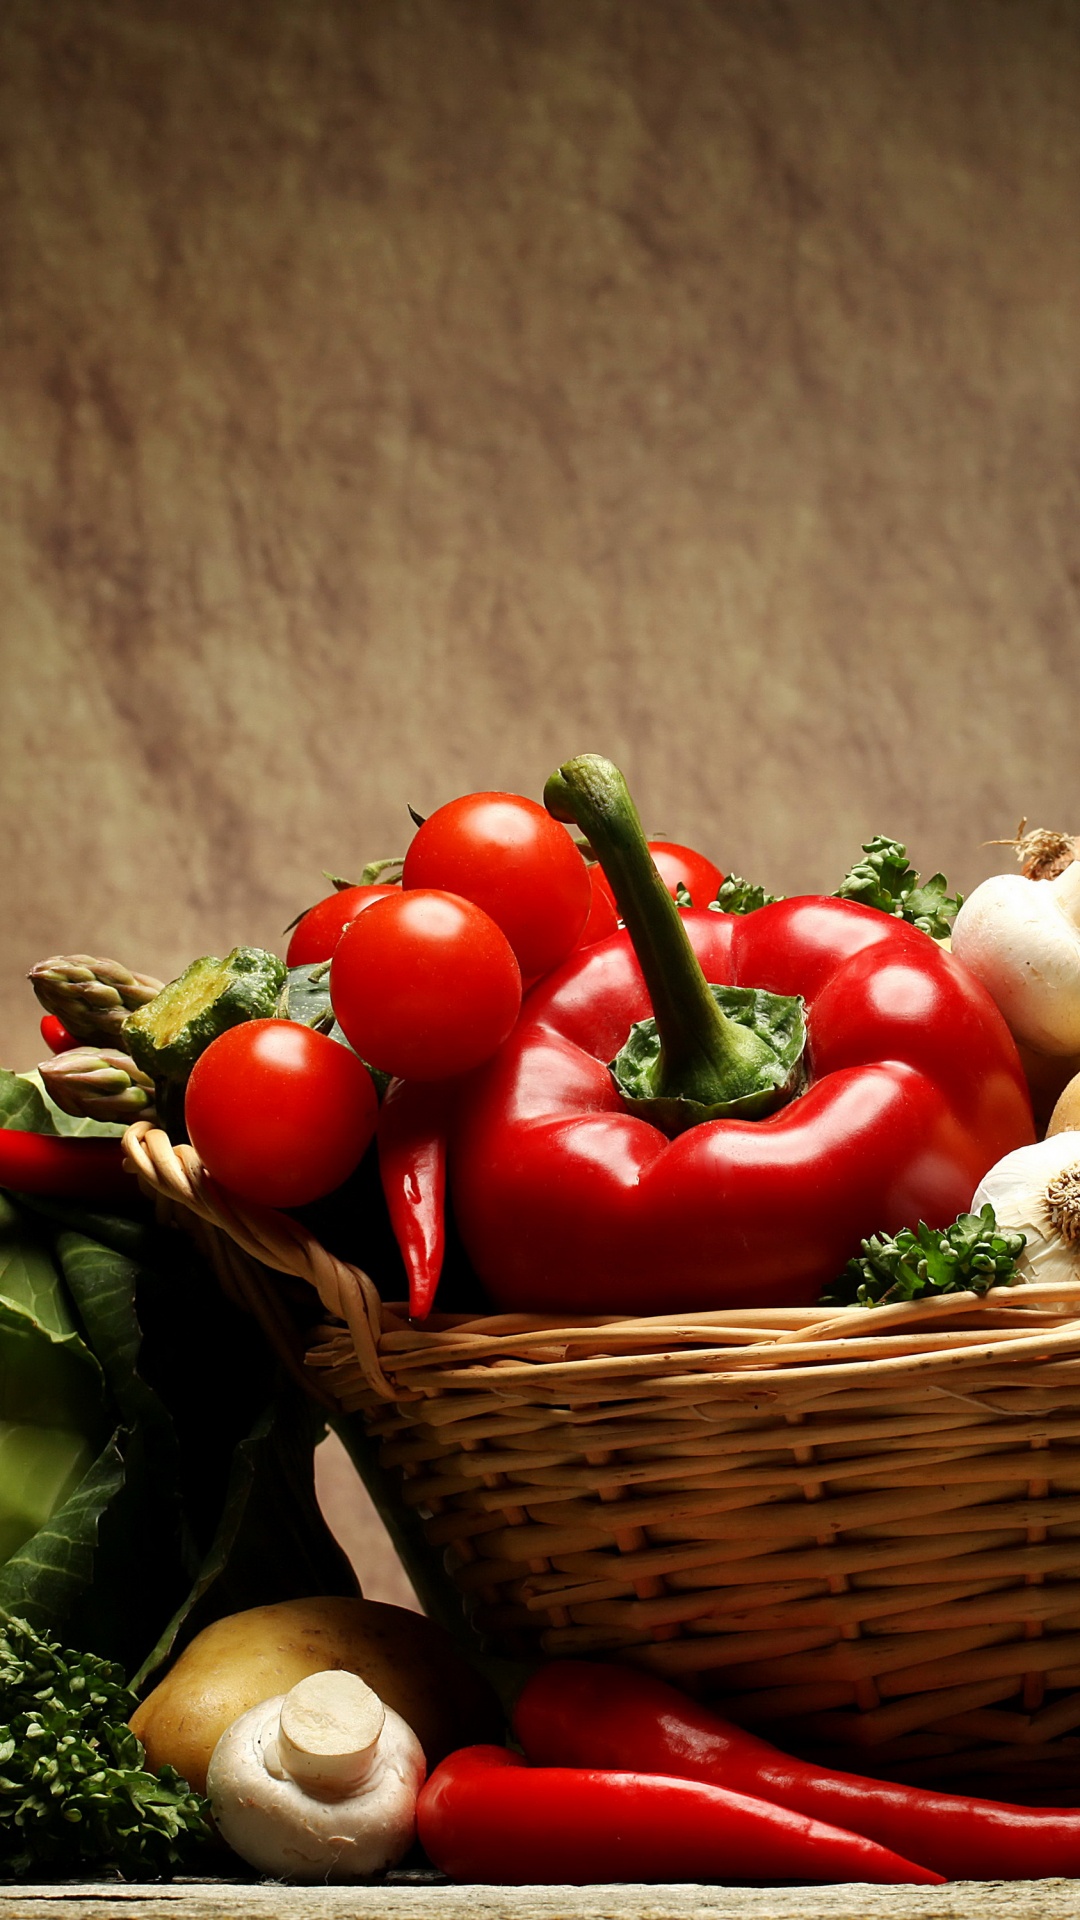 Red Tomatoes and Green Vegetable on Brown Woven Basket. Wallpaper in 1080x1920 Resolution